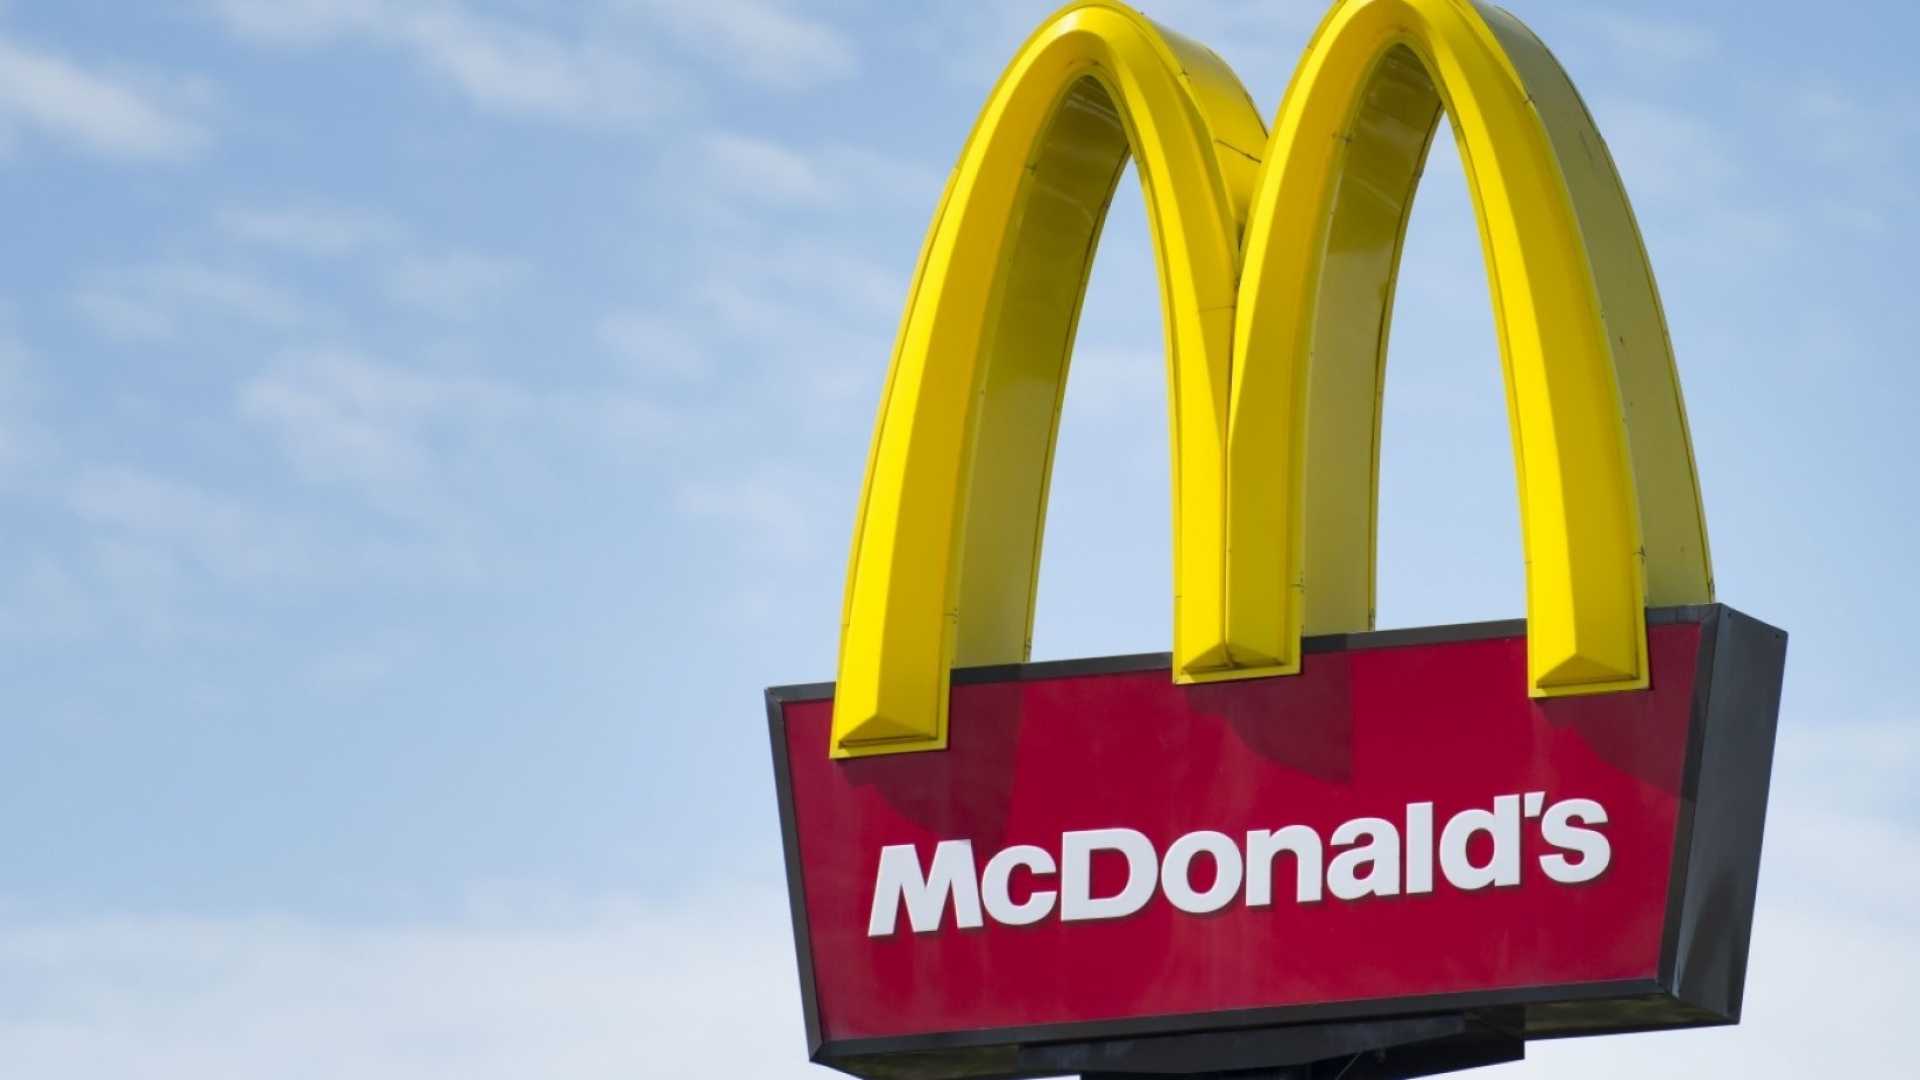 Brand McDonald's The World's Most Admired FastFood Brand The